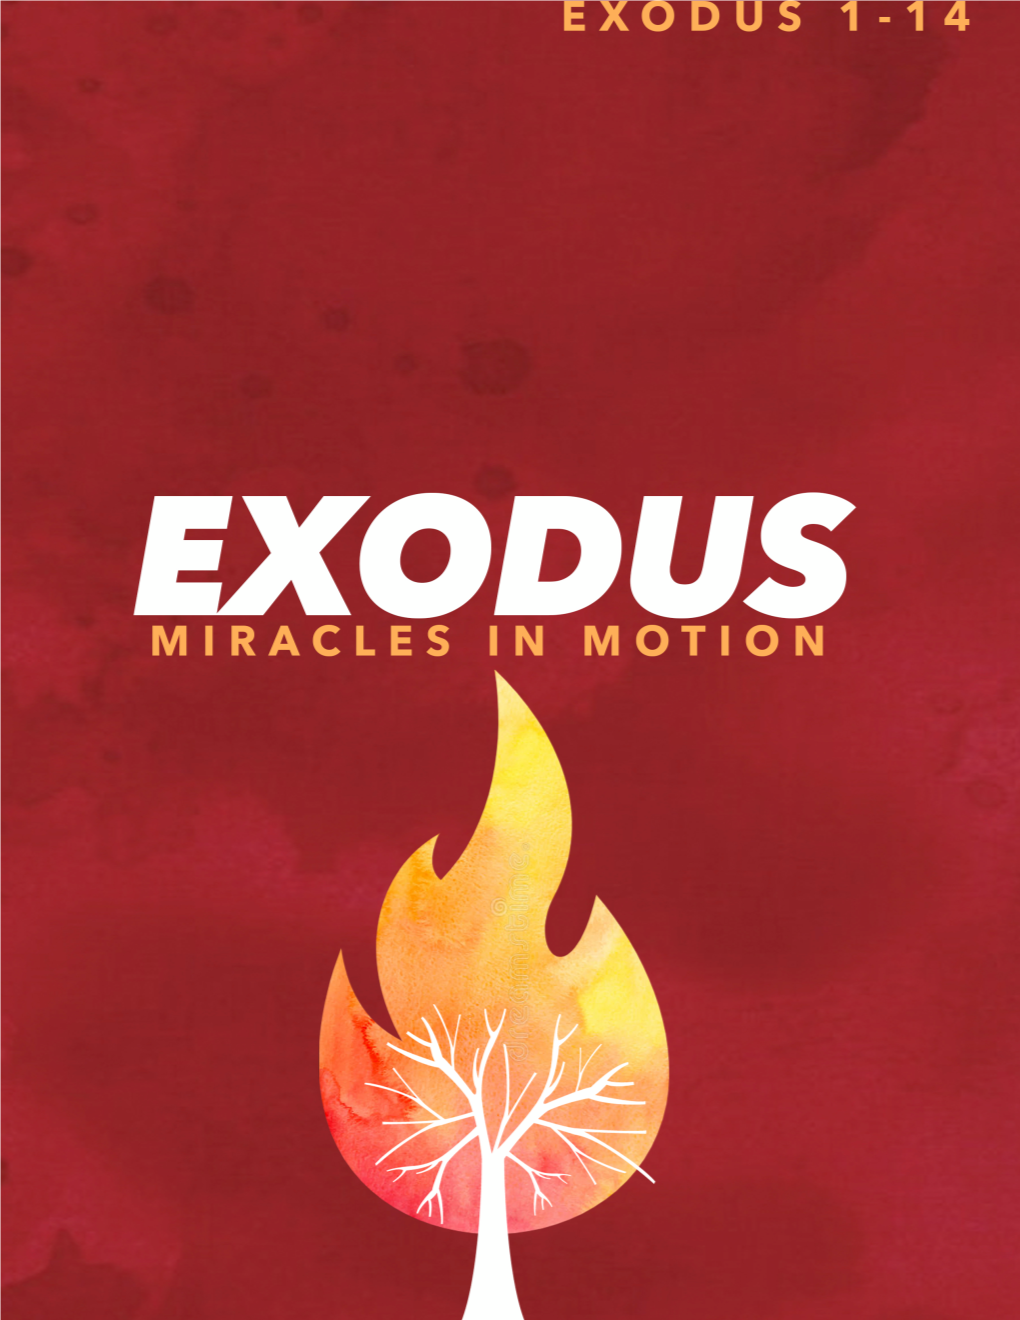 Miracles in Motion While His People Moved Forward